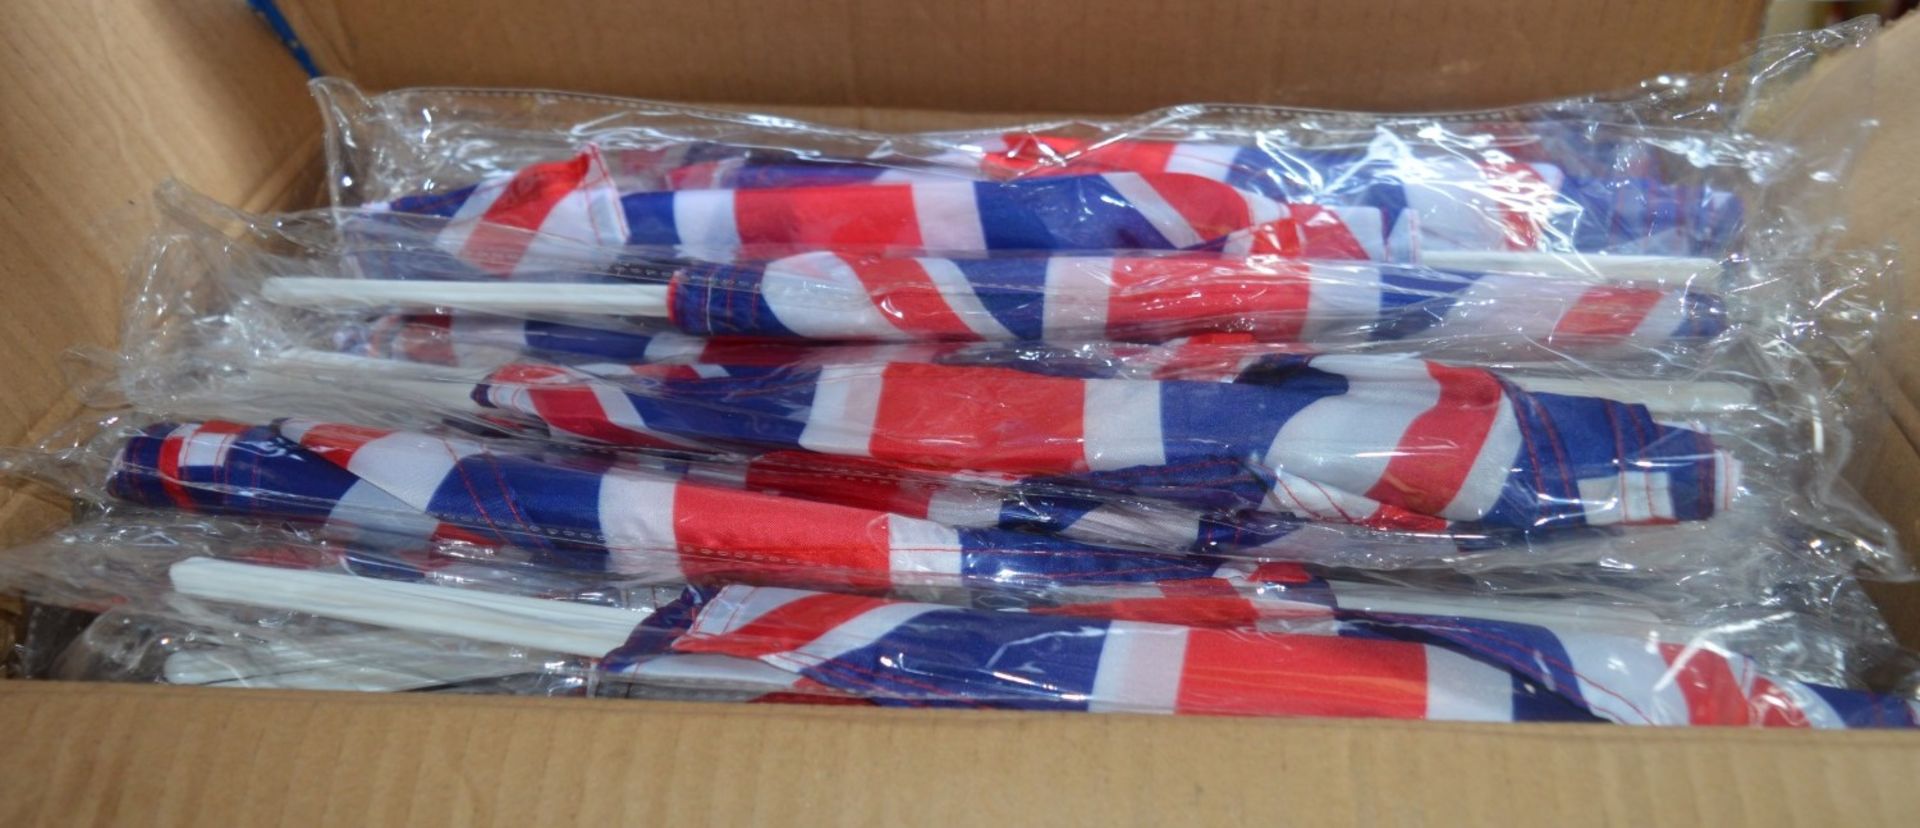 144 x British Union Jack Car Flags - Ideal For Sports Events or Patriotic British Moments - Brand - Image 3 of 3